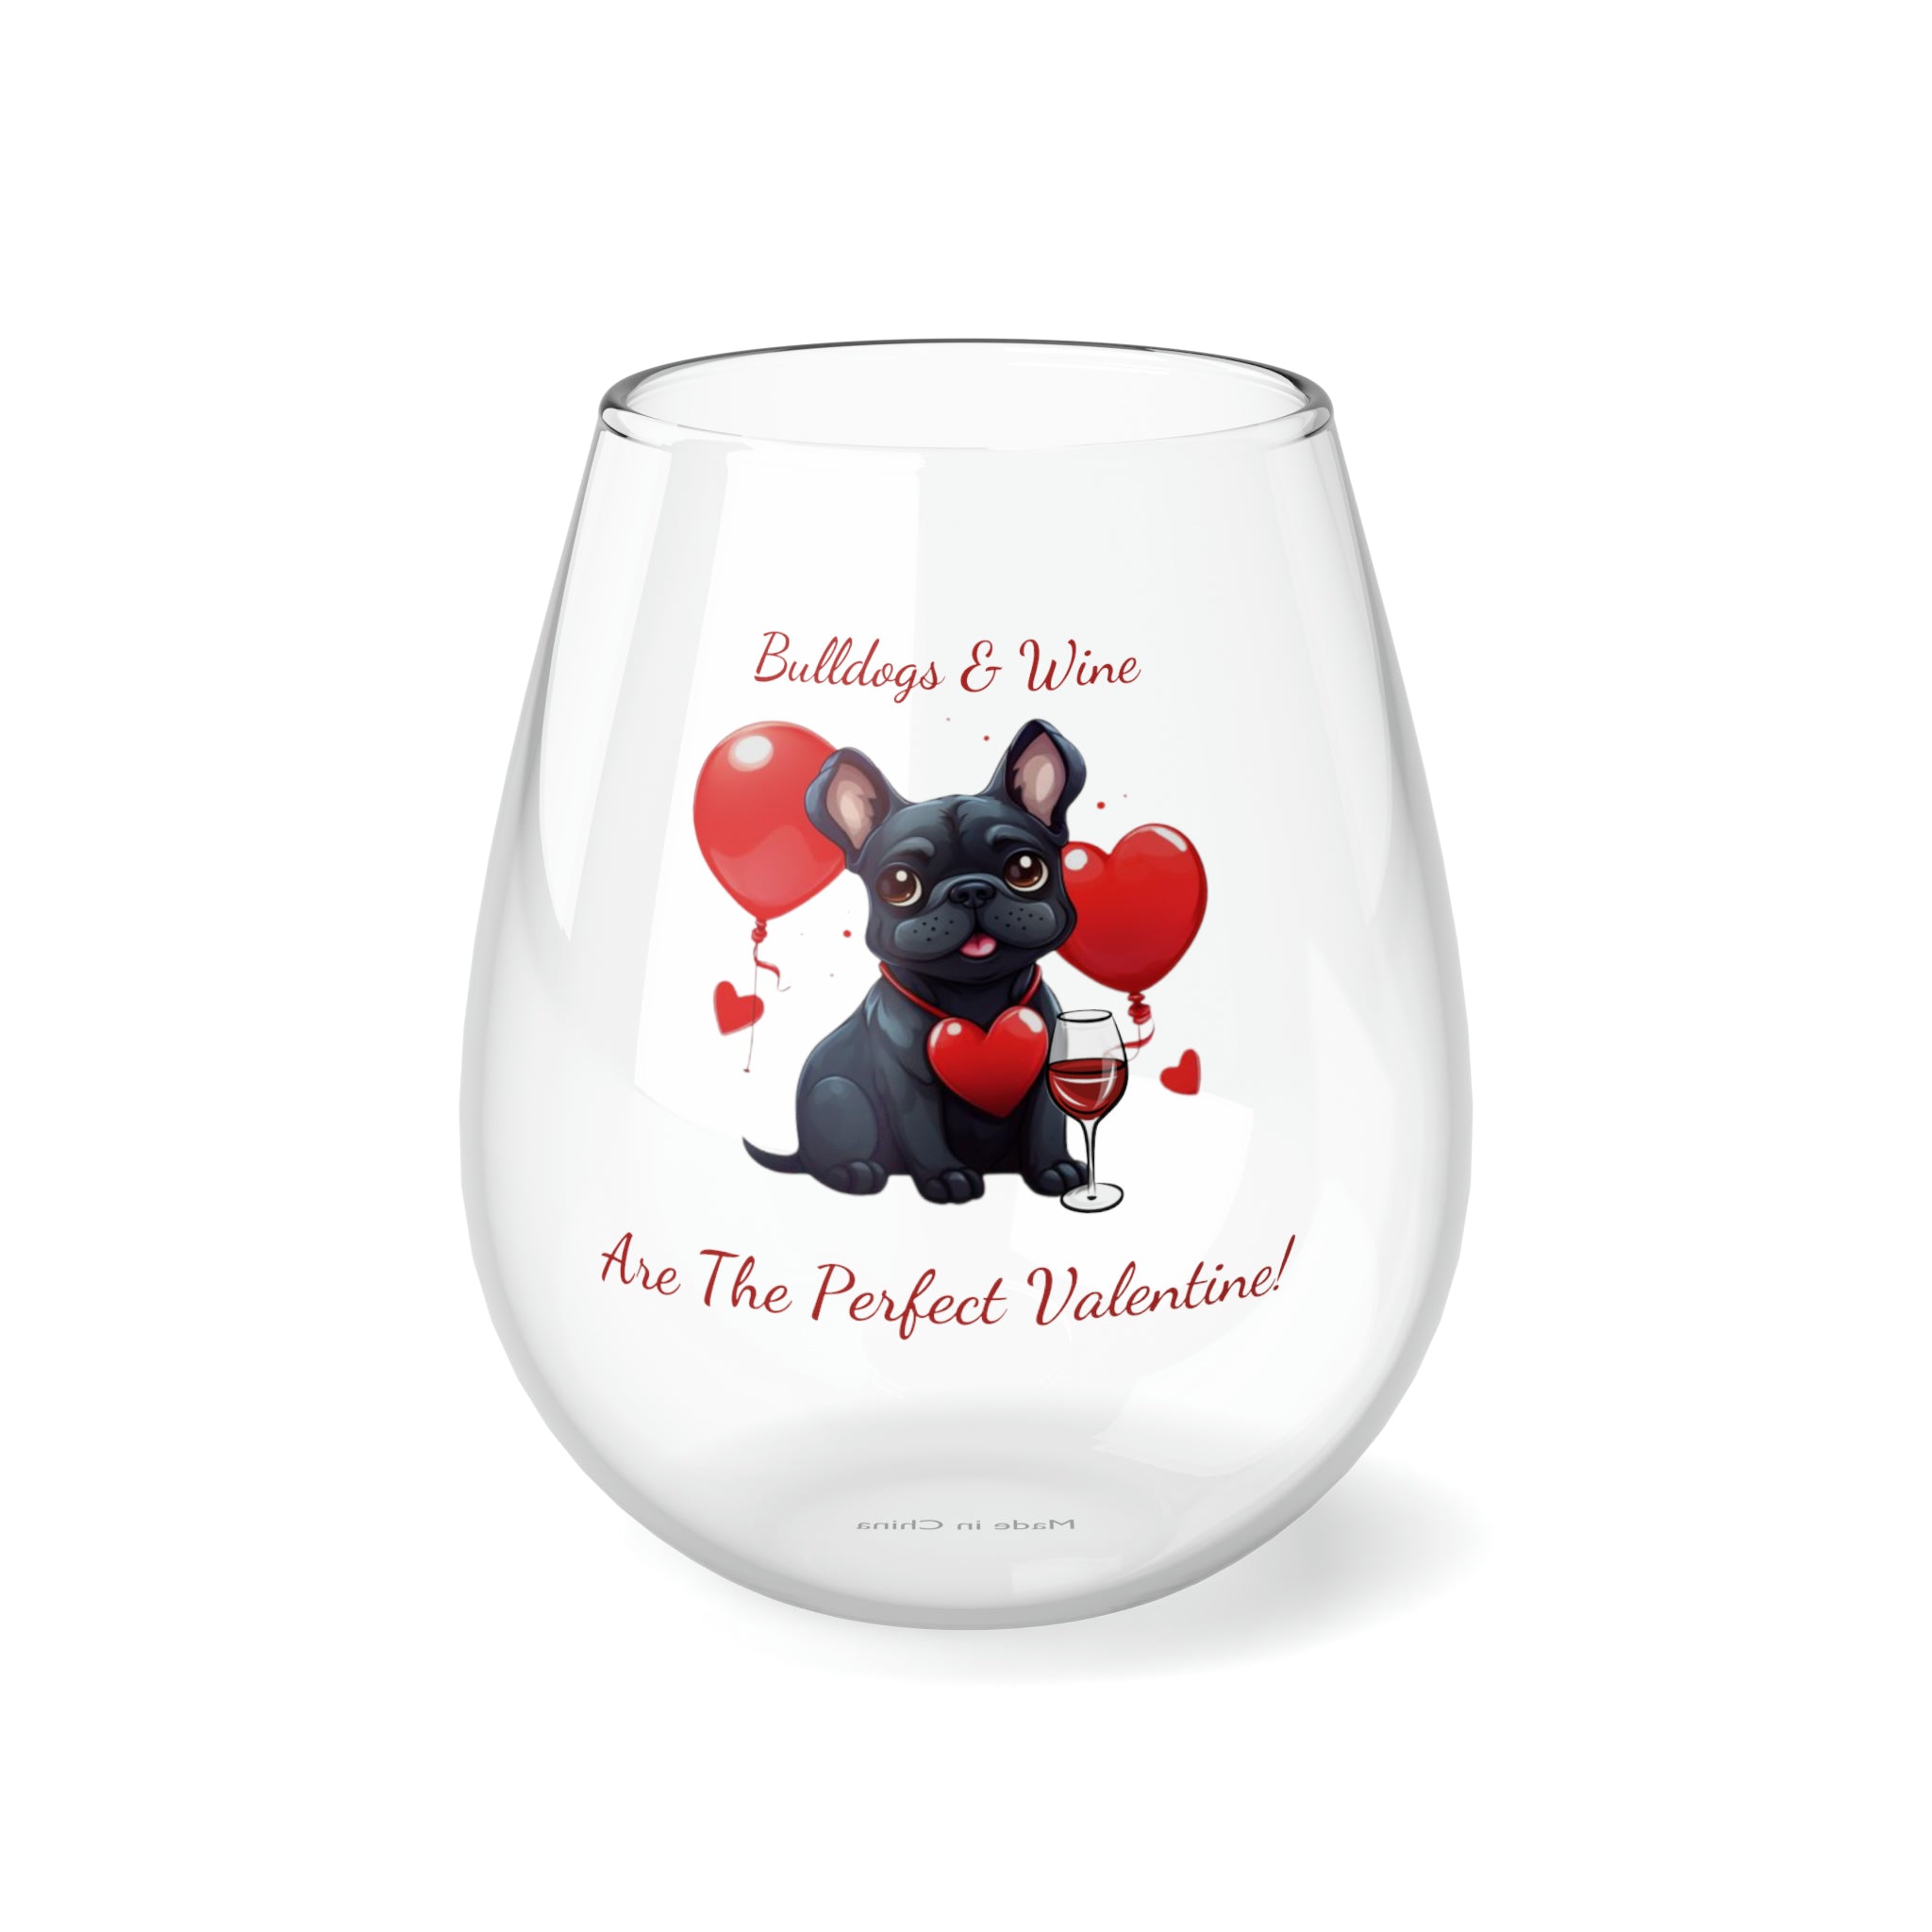 Bulldogs & Wine Are the Perfect Valentine! Stemless Wine Glass - Black French